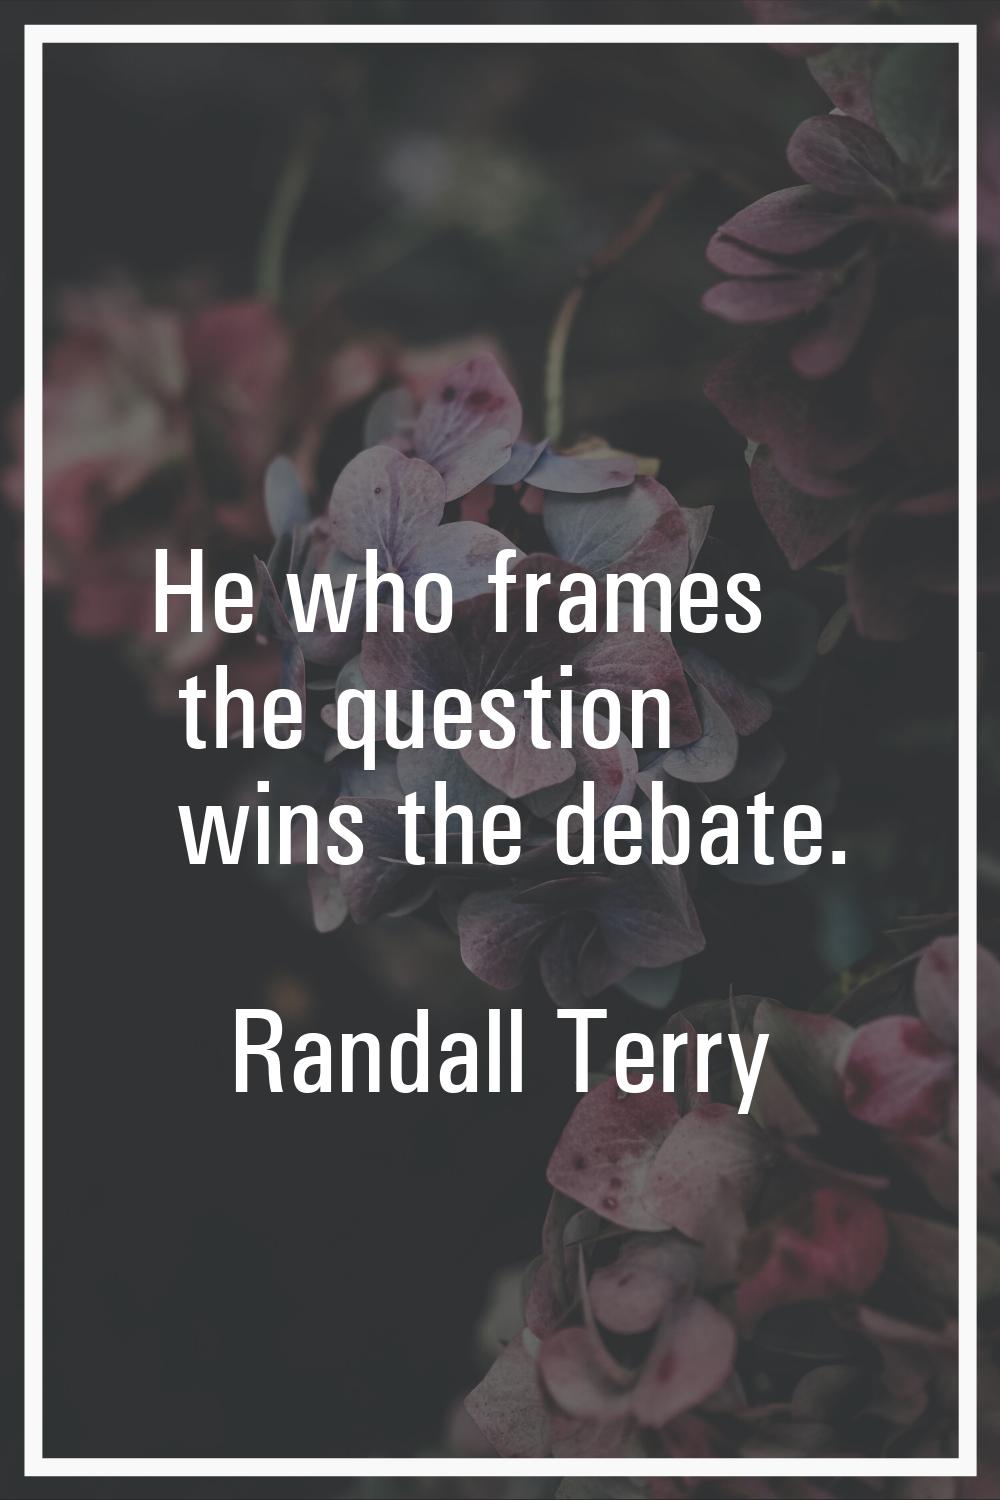 He who frames the question wins the debate.